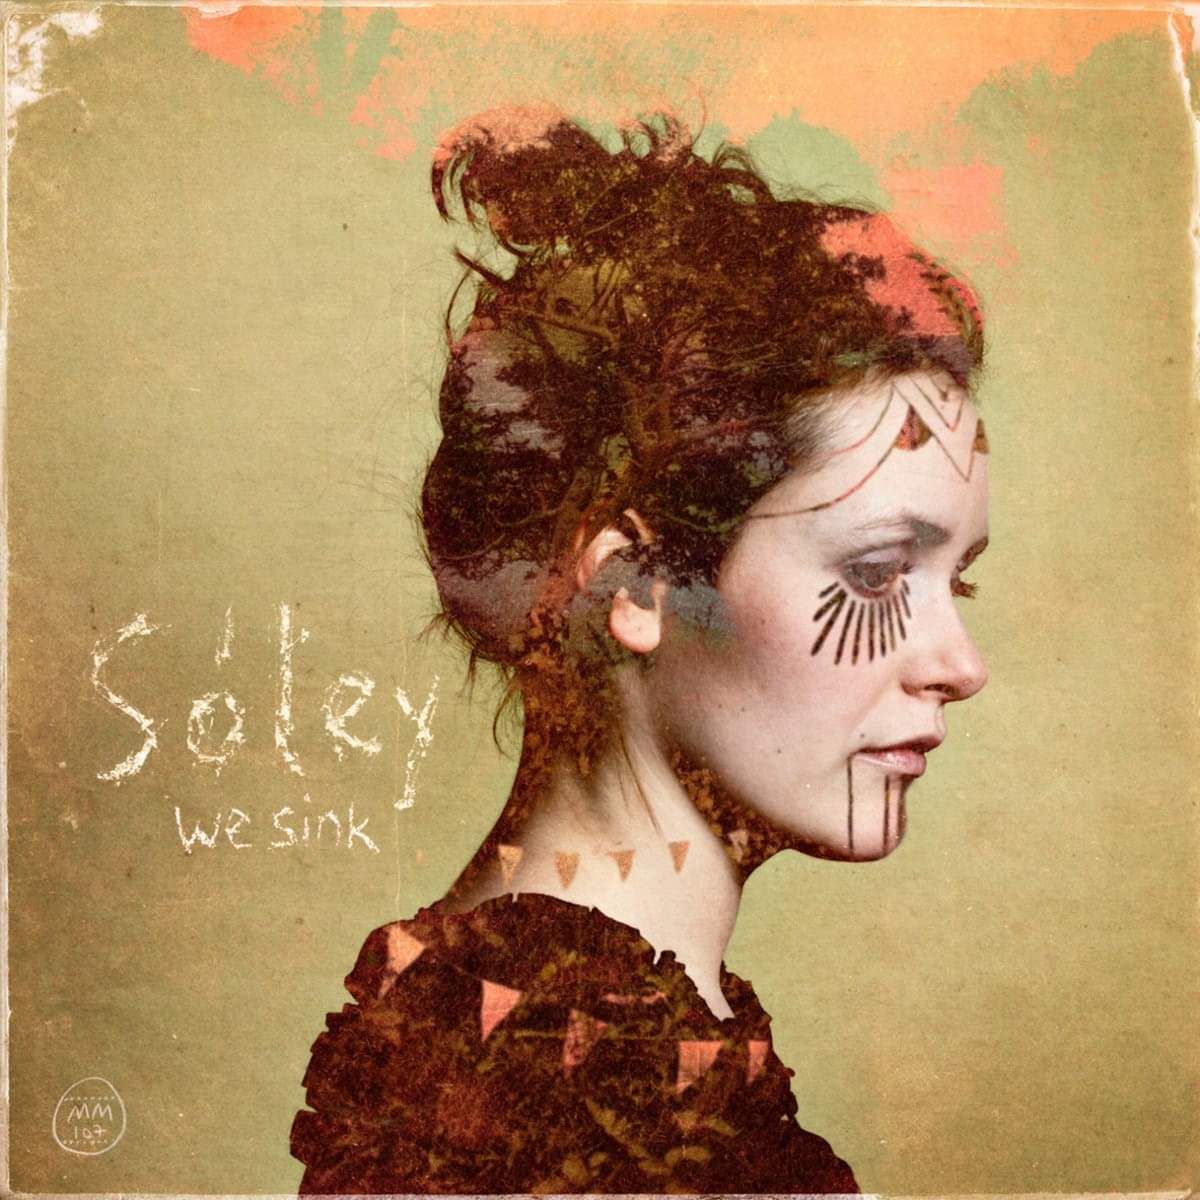 I started listening to Sóley back in high school as well. The beautiful progressions and storytelling in her track “Smashed Birds” from her album "We Sink" stayed with me ever since. I remember crying and not knowing why. We all have that one song. 